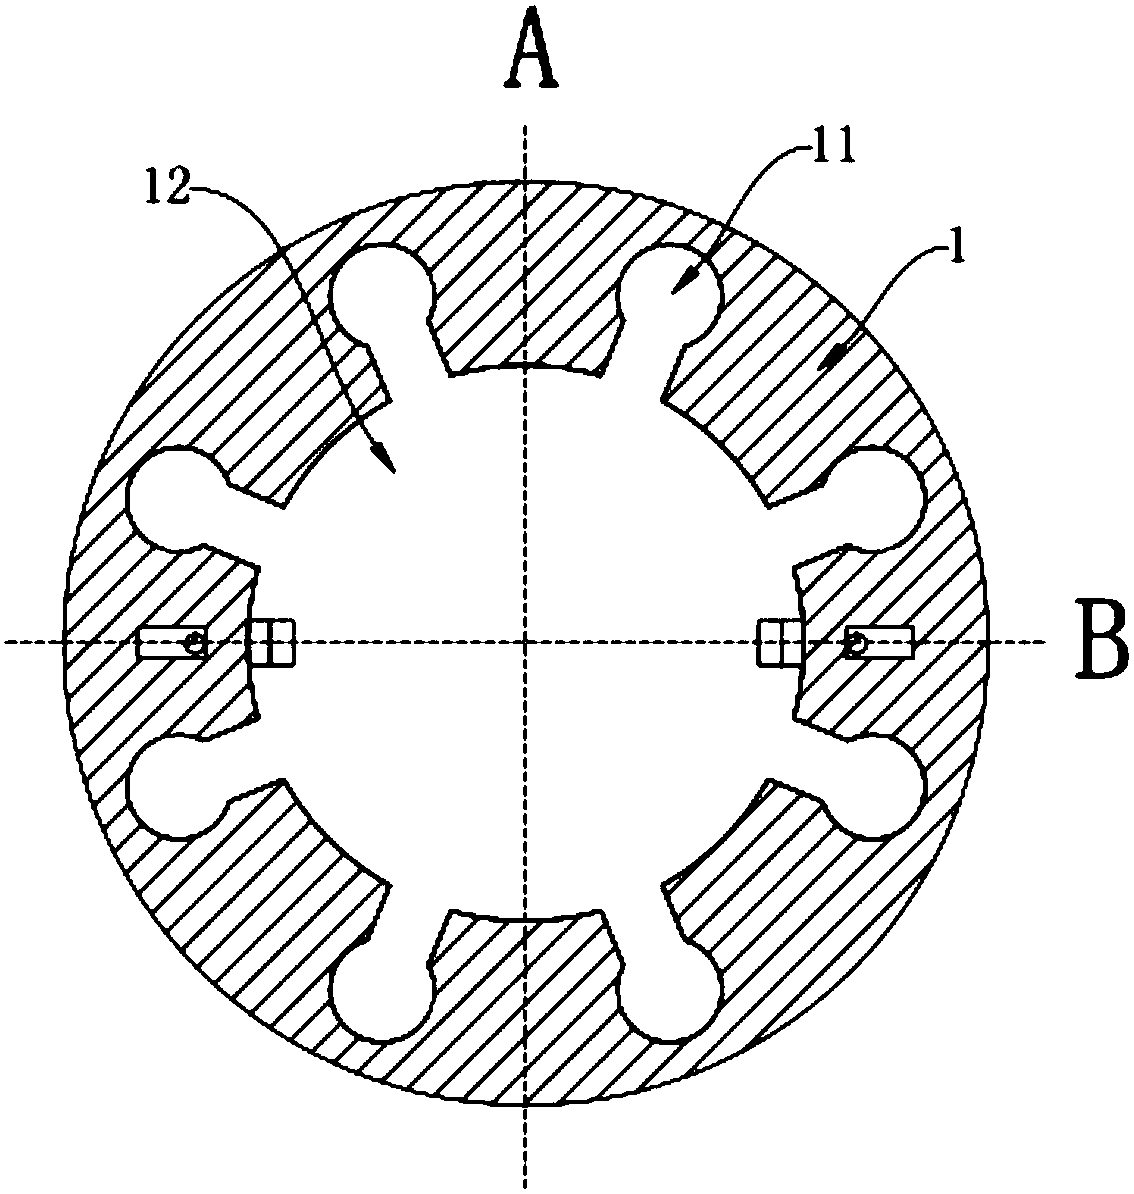 Connecting structure for motor output shaft and rotary shaft